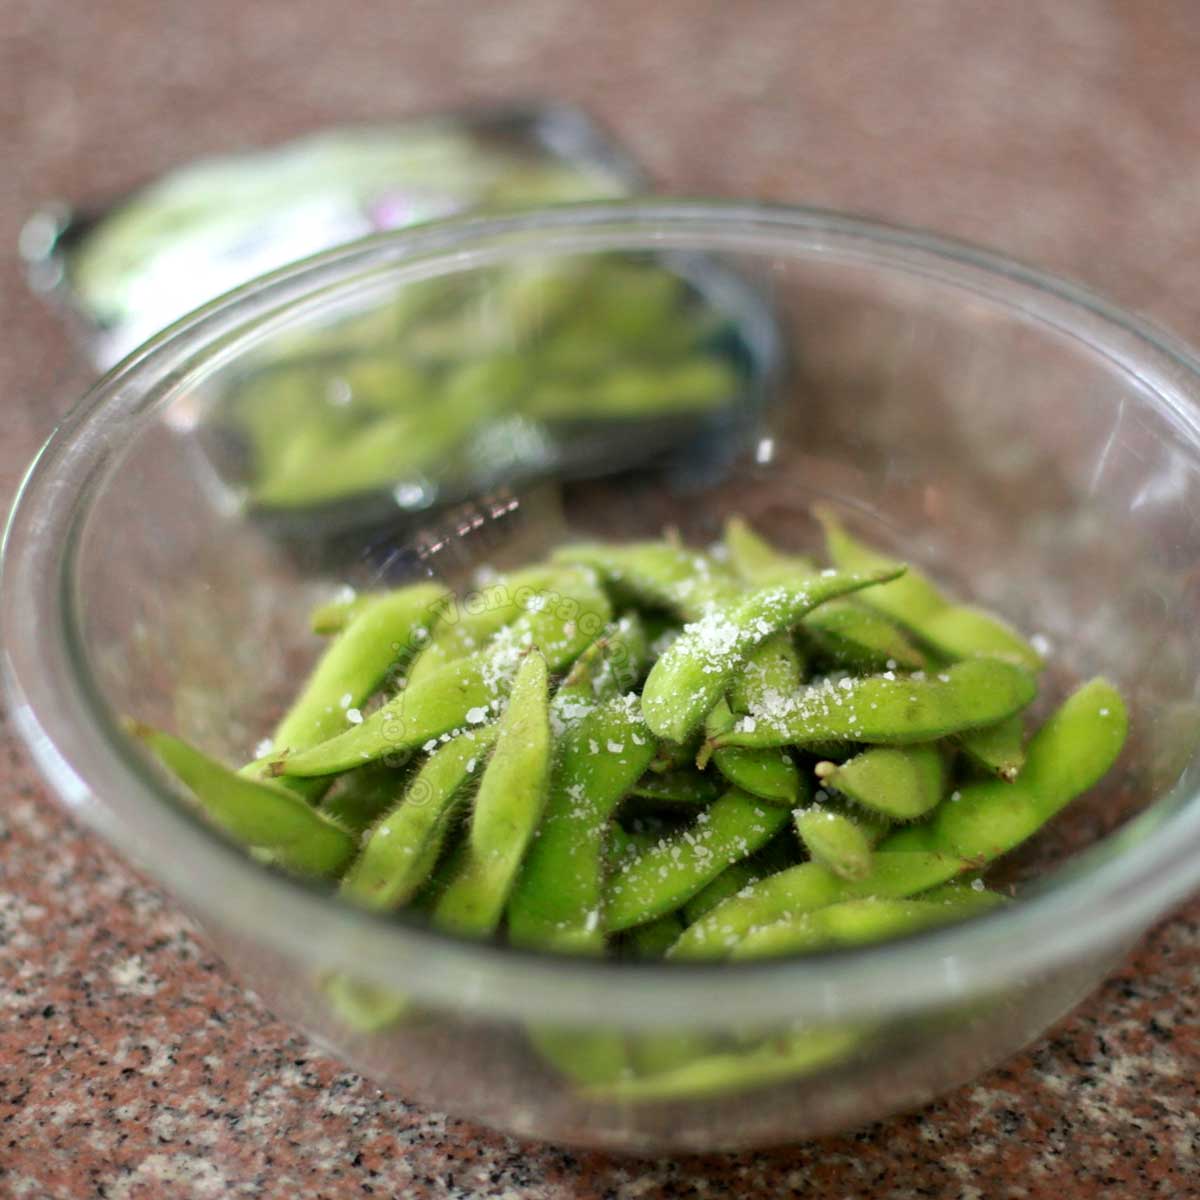 Edamame (fresh soy beans in pods) sprinkled with salt